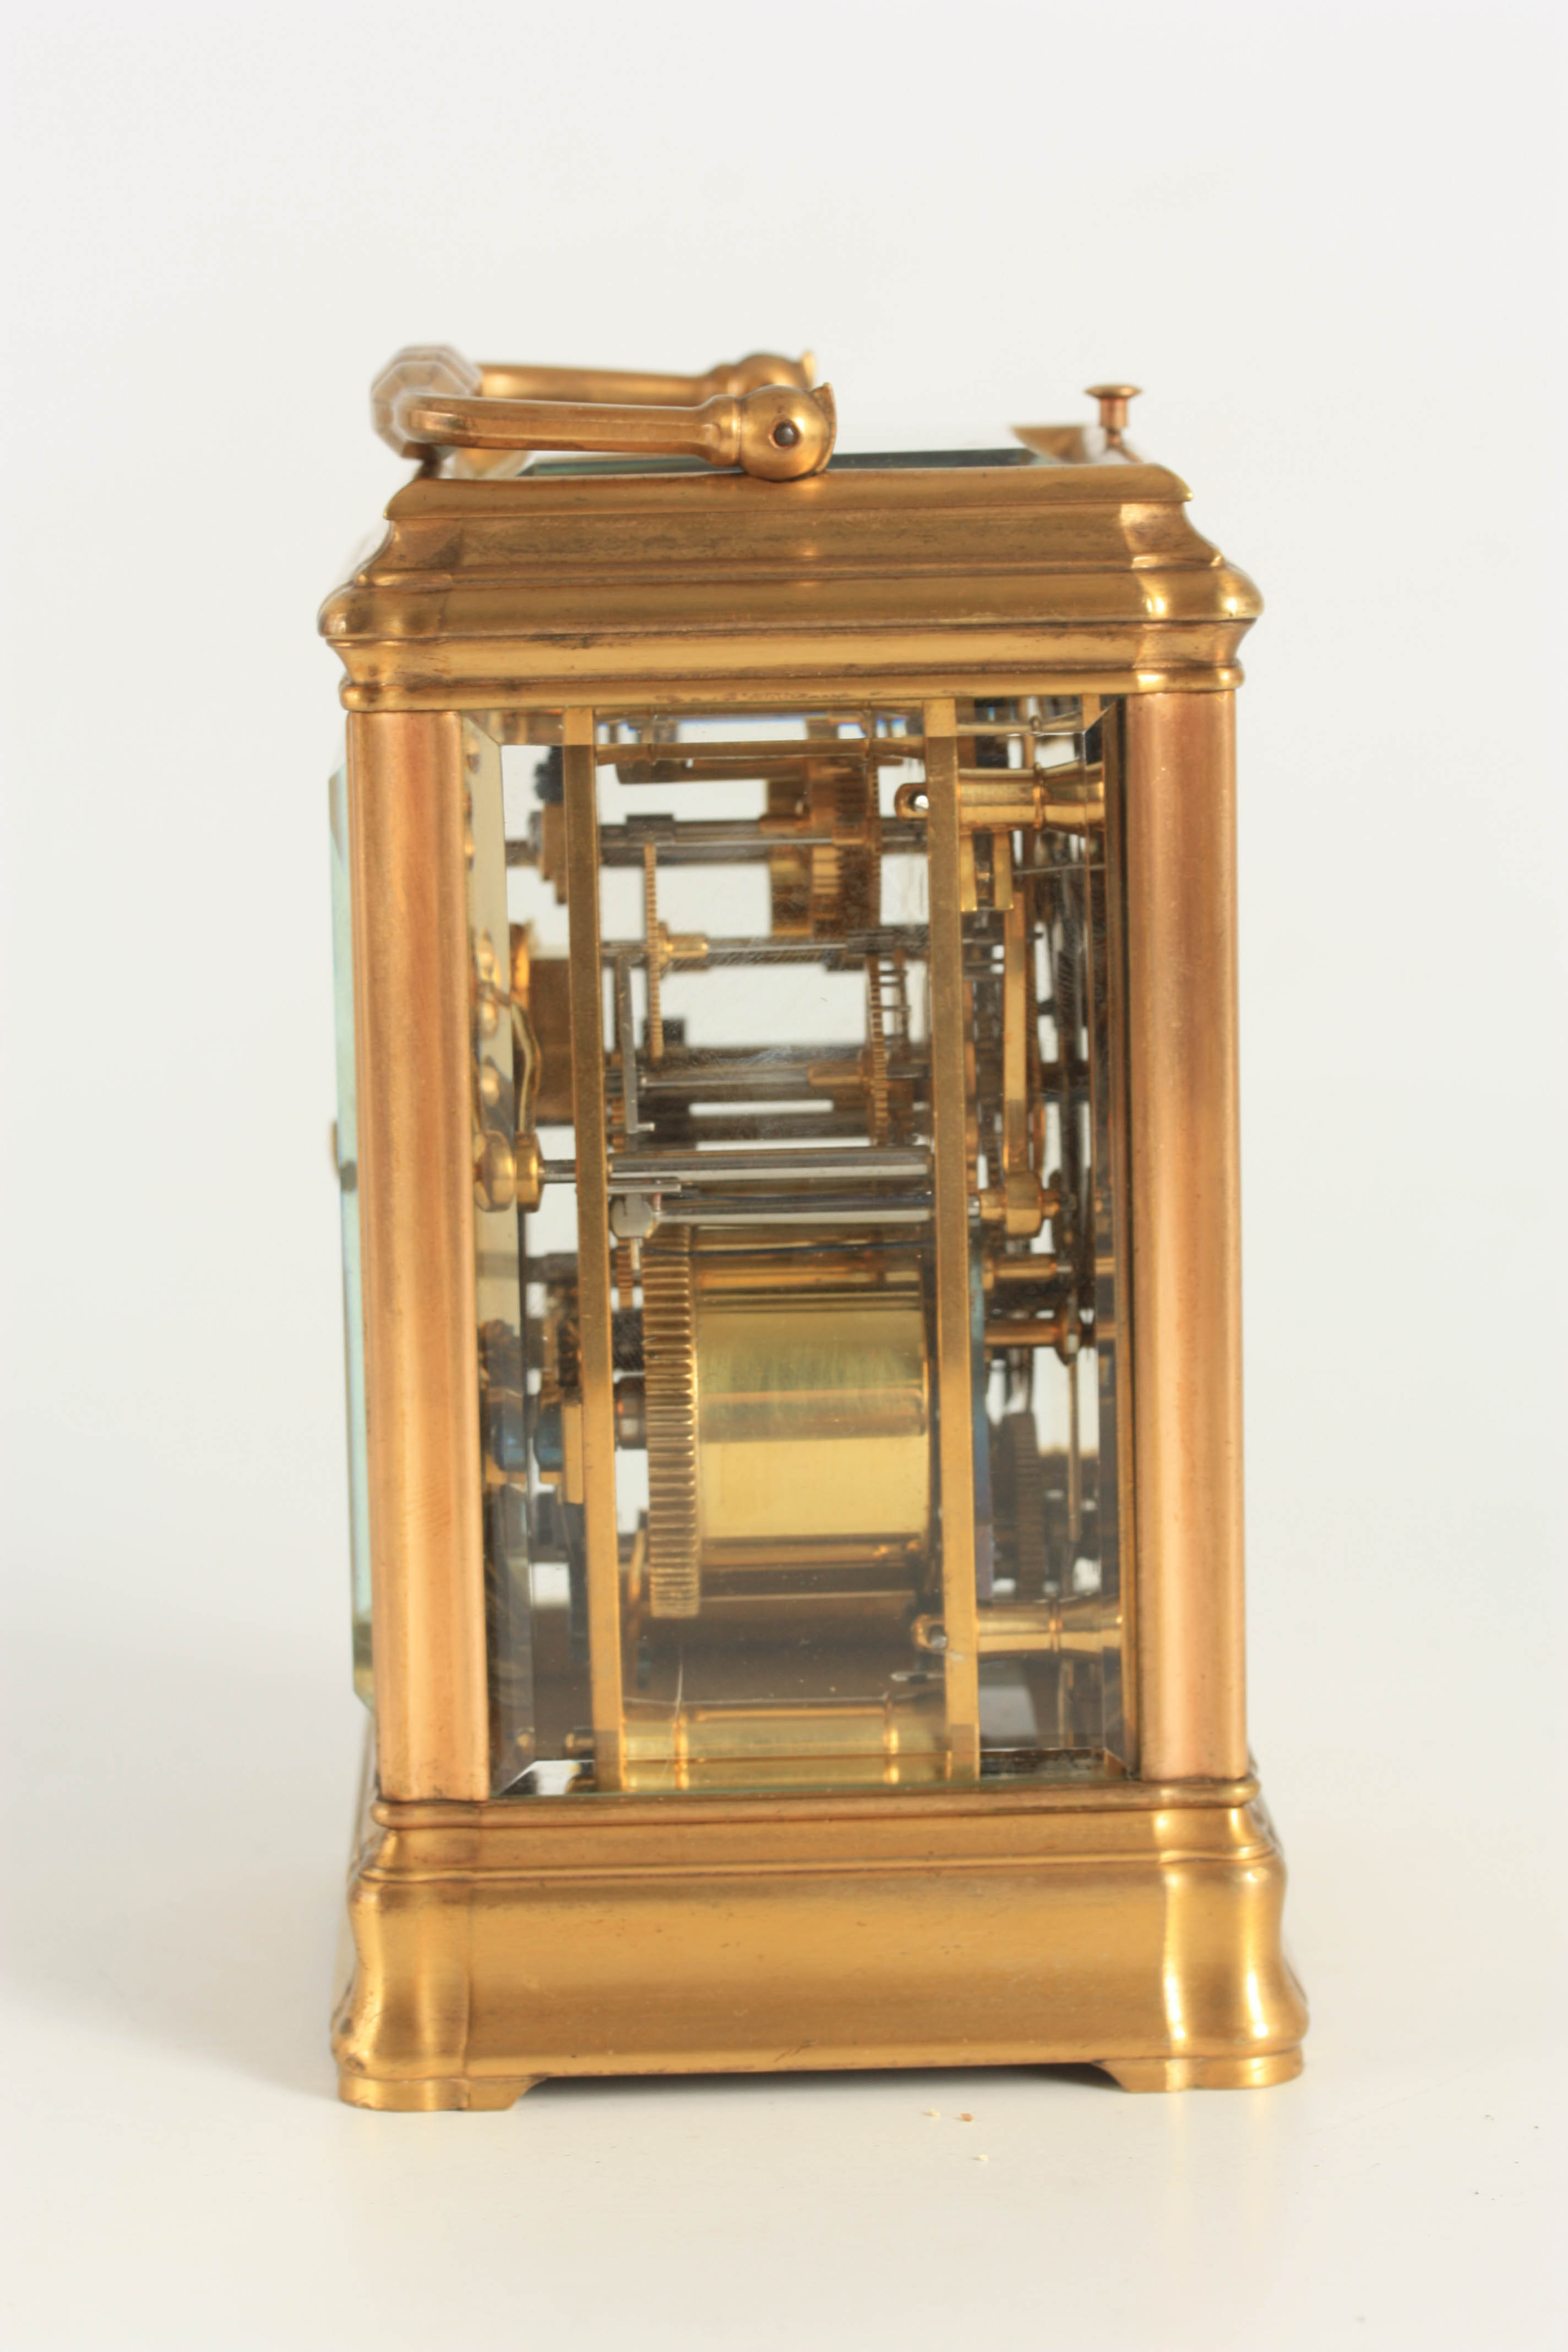 HENRI JACOT, PARIS NO 19132 A LATE 19TH CENTURY FRENCH GILT BRASS GORGE CASE STRIKING CARRIAGE CLOCK - Image 7 of 14